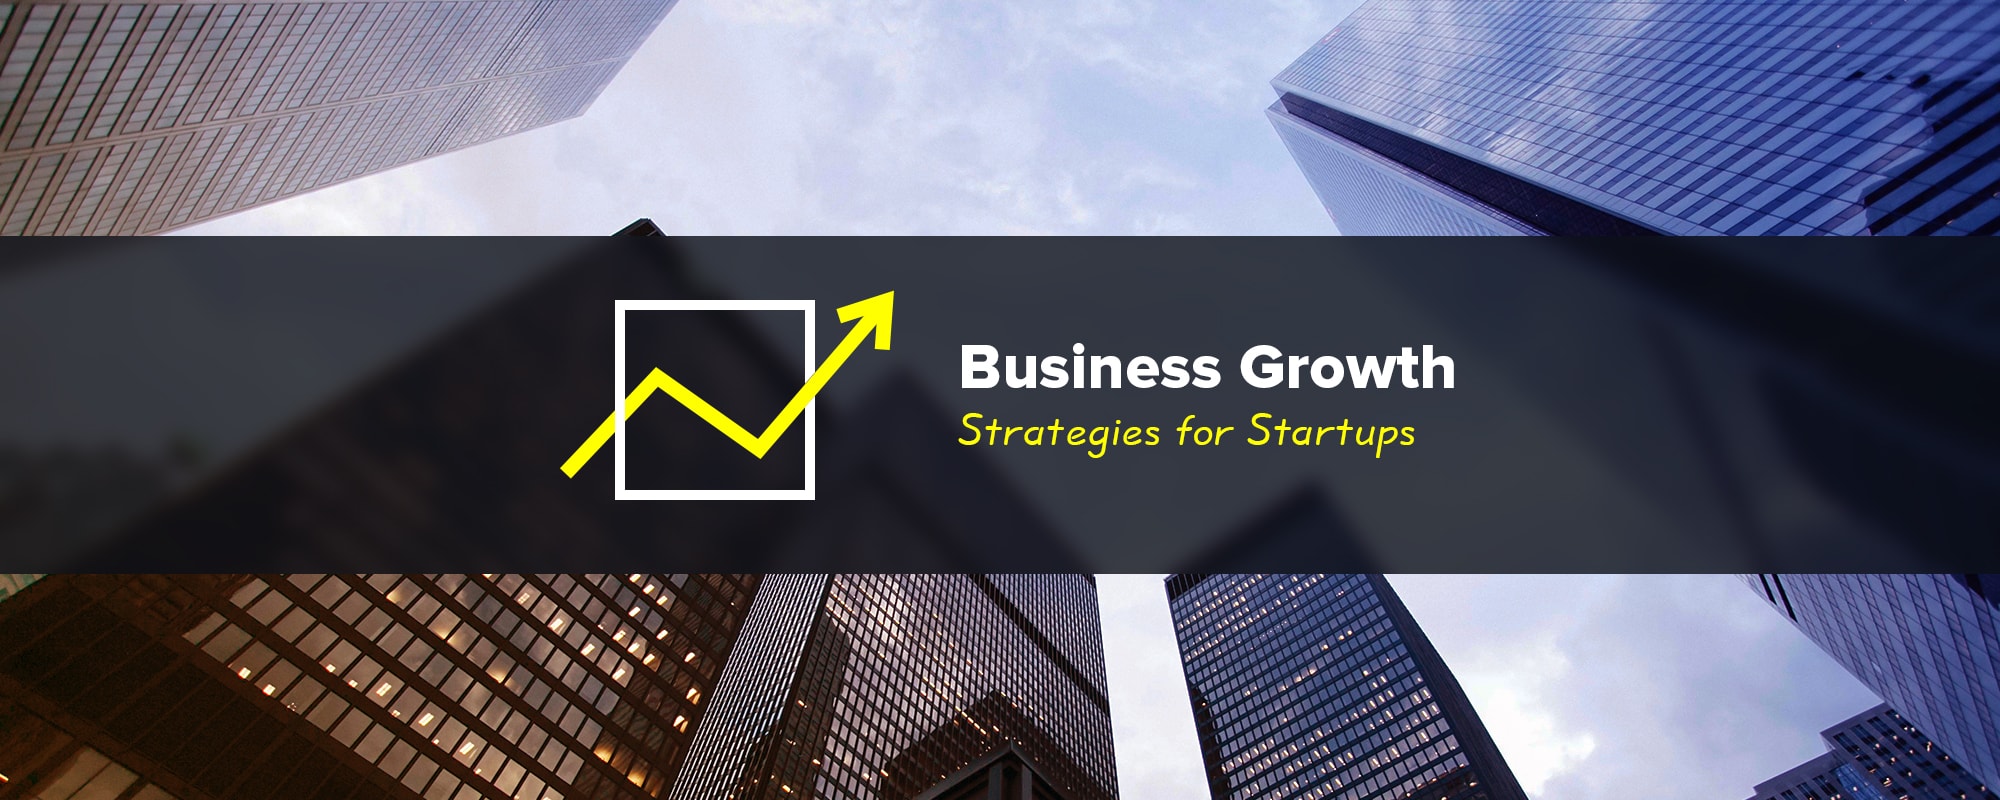 6 Proven Business Growth Strategies for Startups